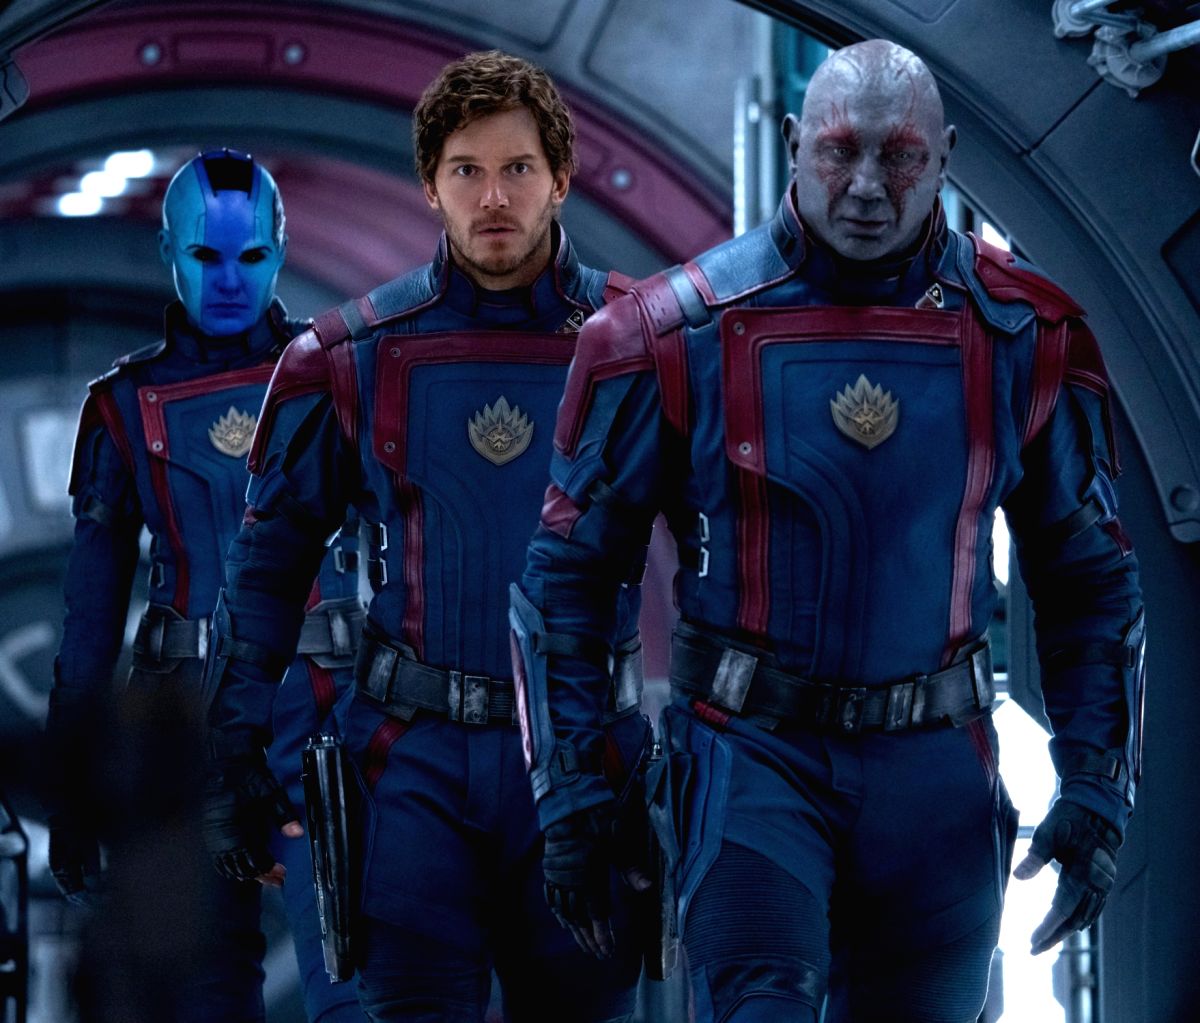 Guardians Of The Galaxy Vol.3